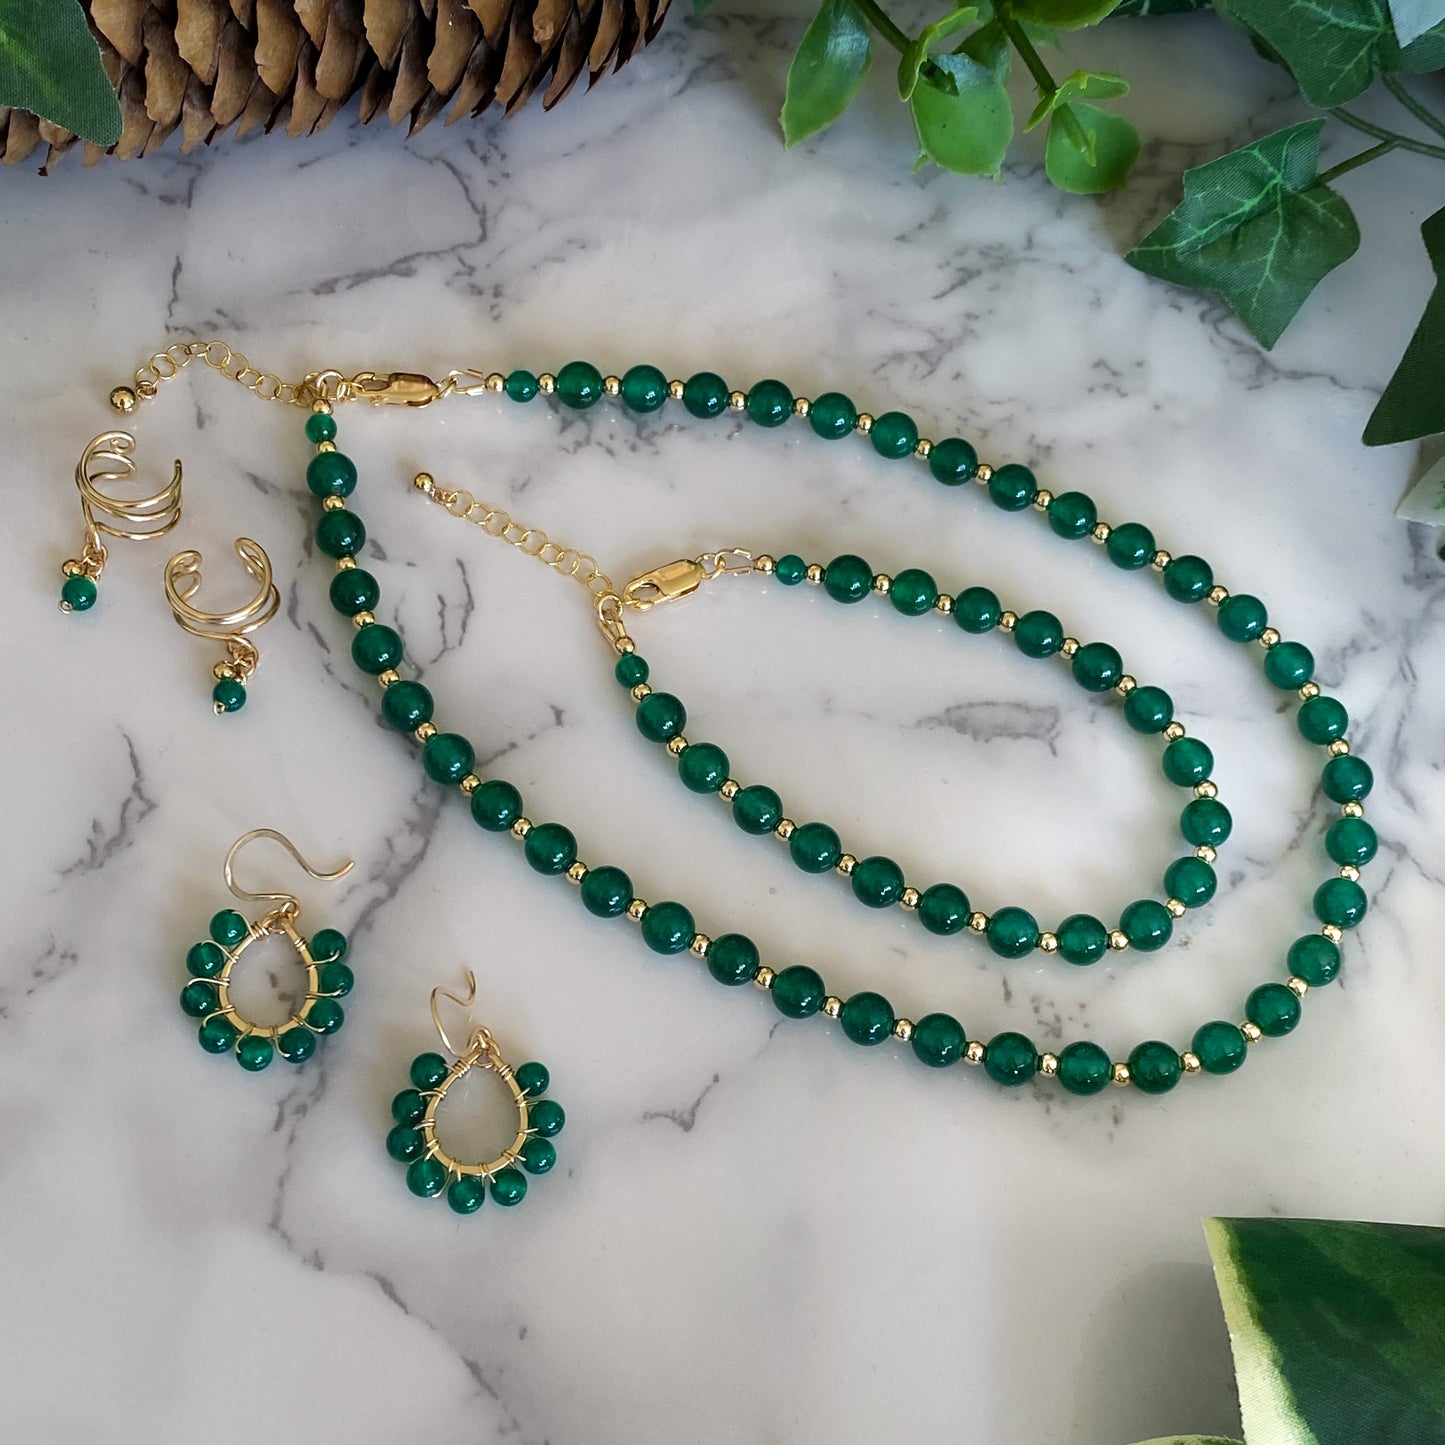 Daphne ~ Green Onyx and 14k Gold Filled Beaded Necklace